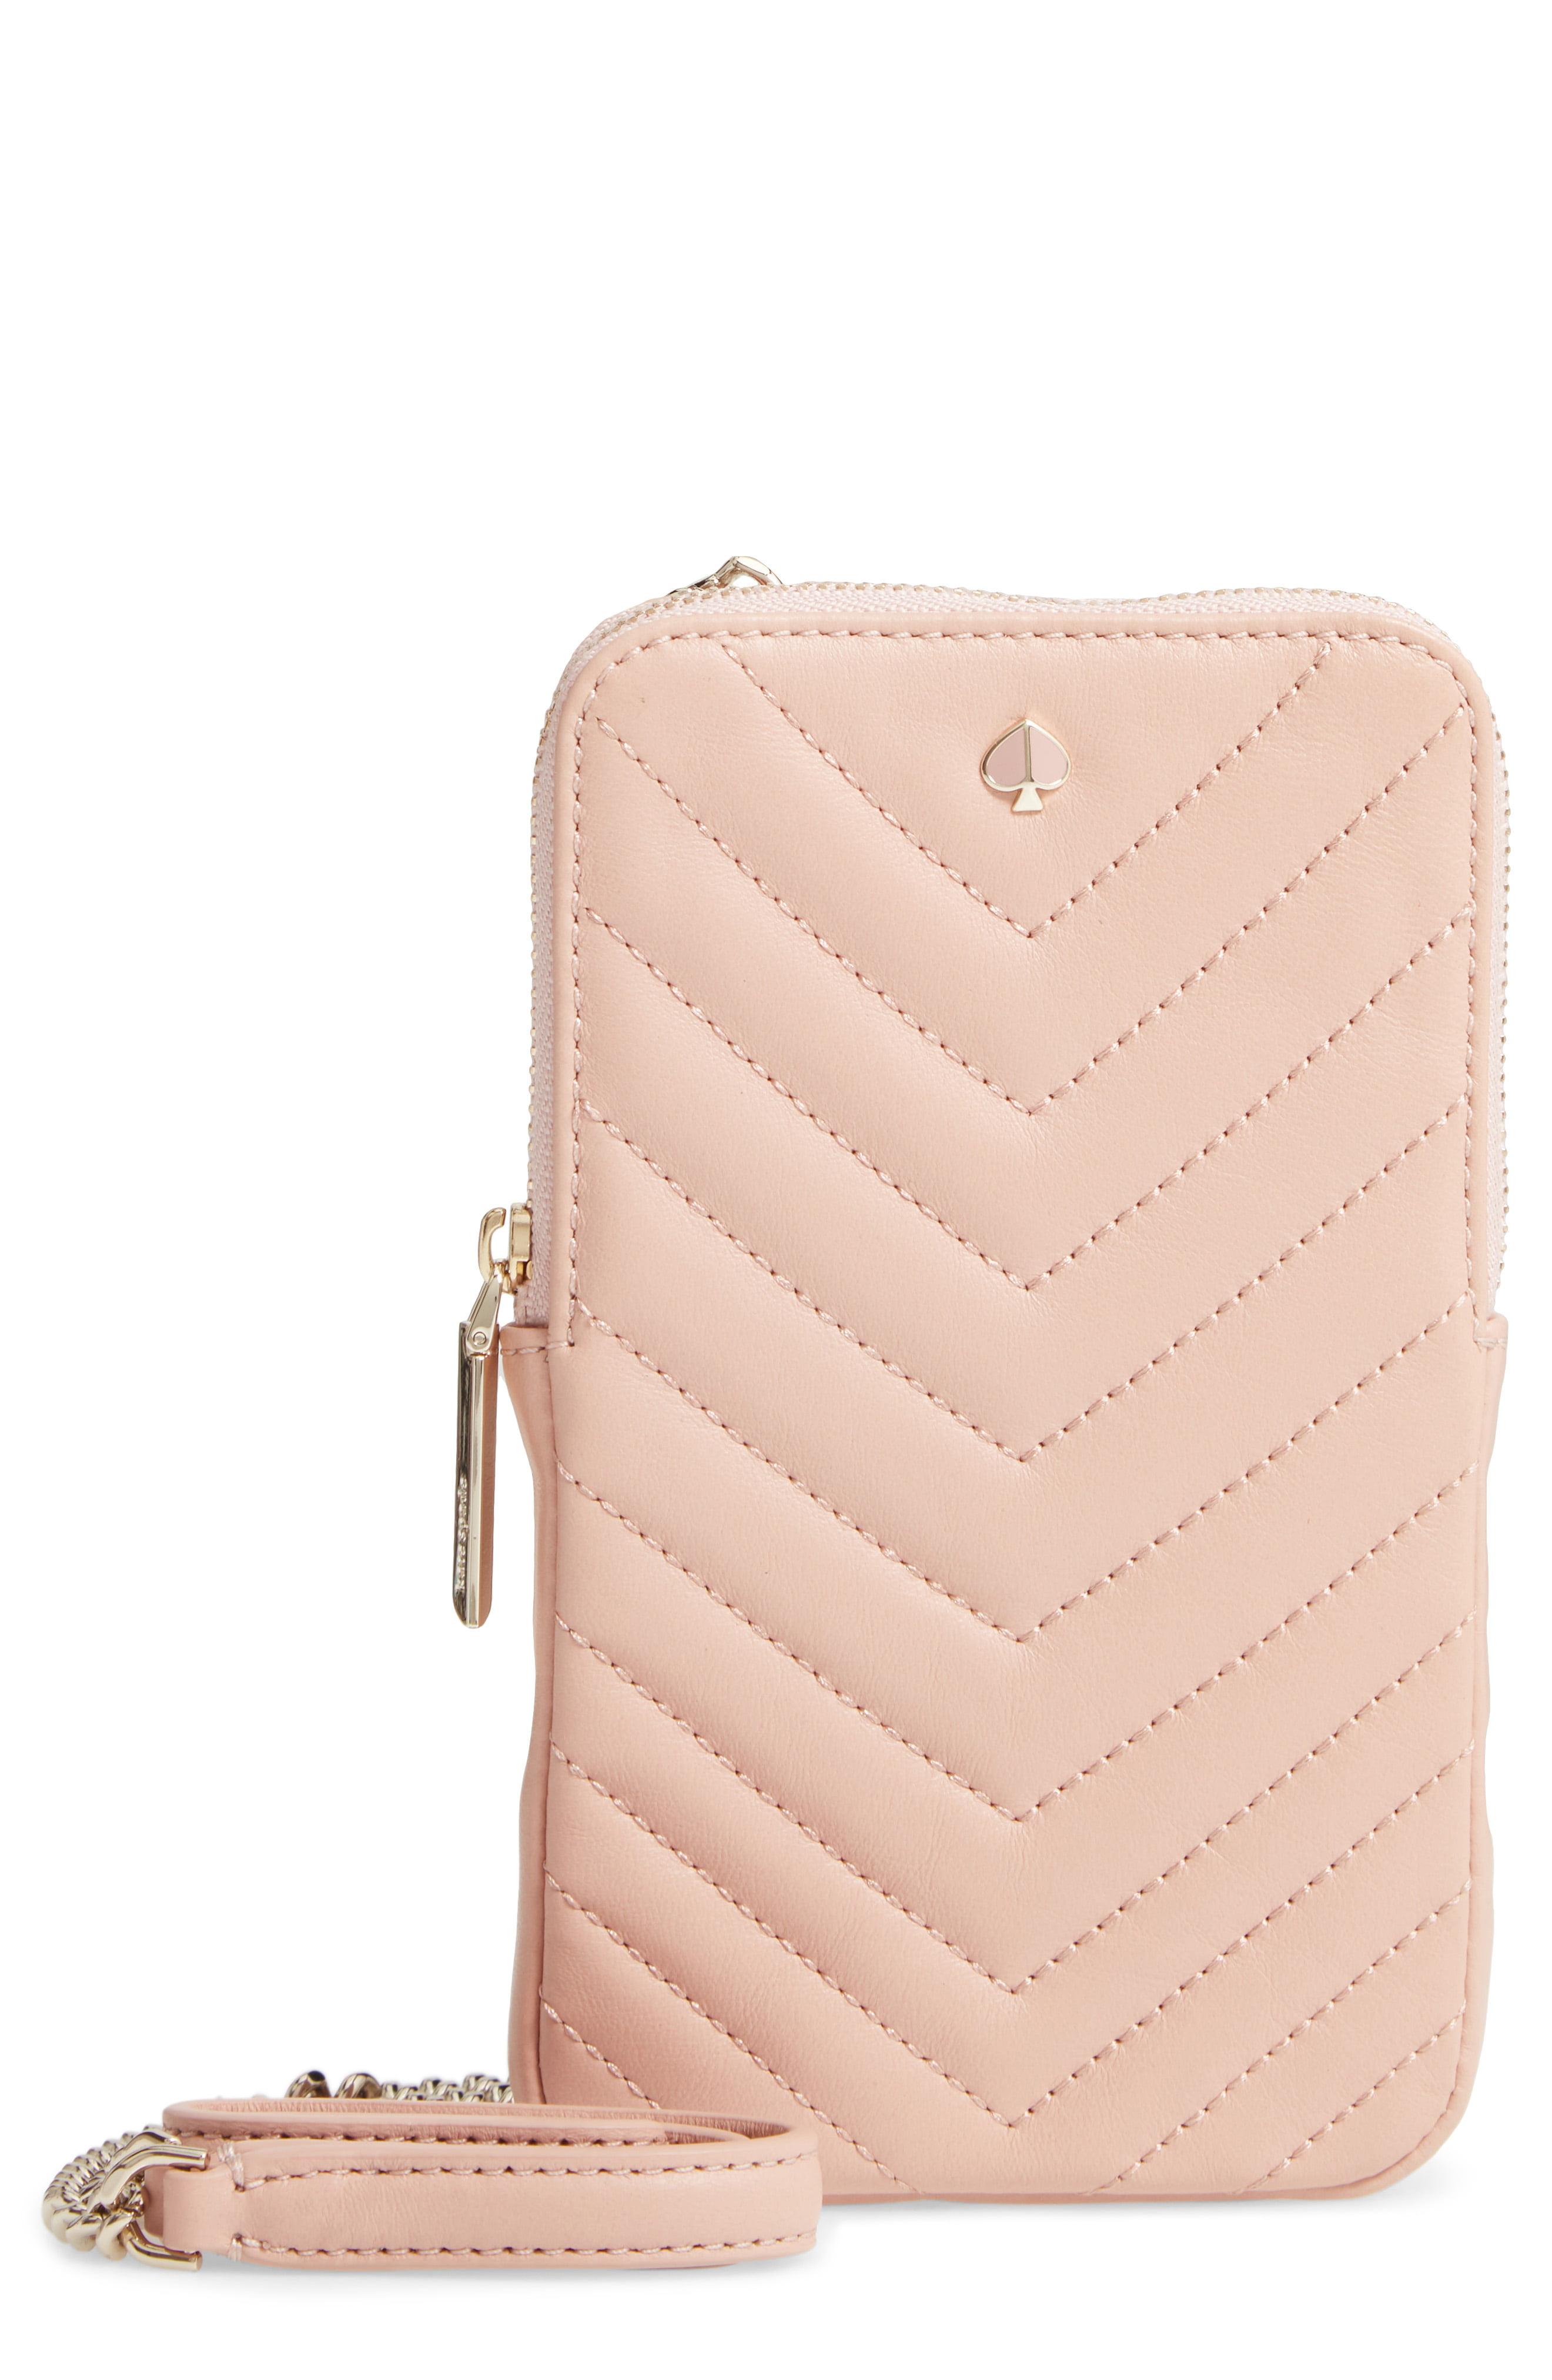 Lyst - Kate Spade Amelia Quilted Leather Phone Crossbody Bag in Pink